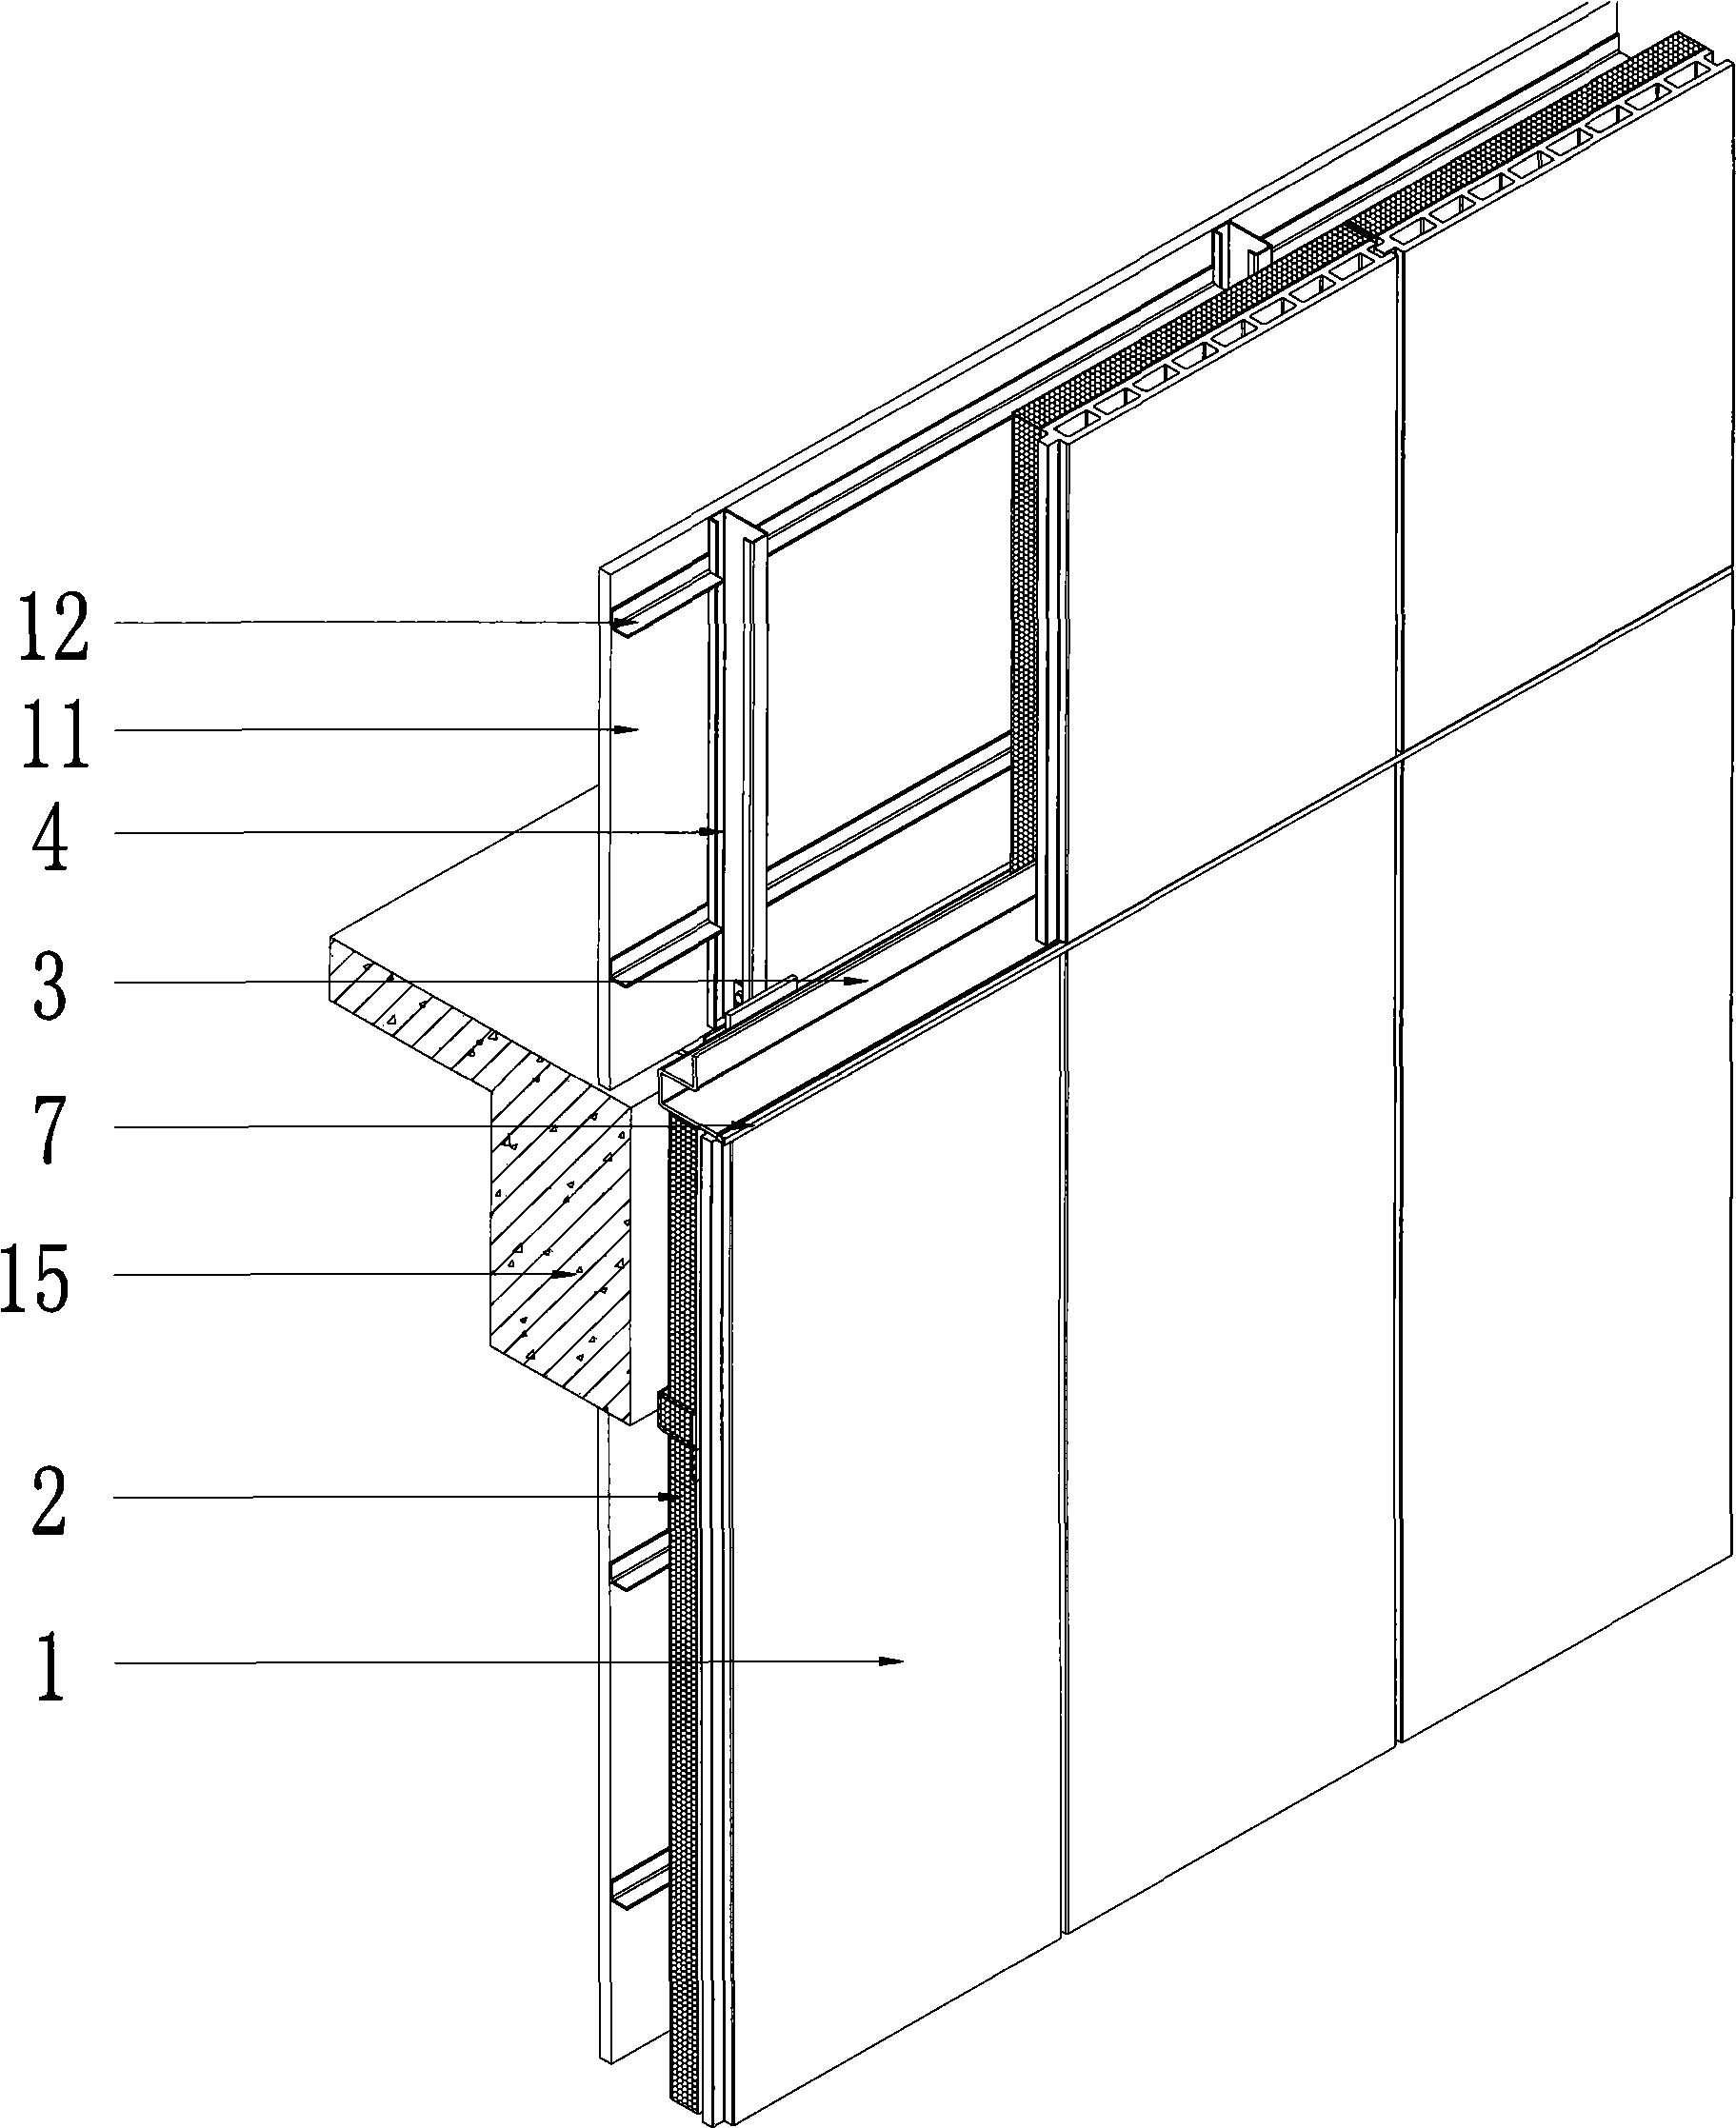 Mounting structure for dry-hanging keel of cement fiberboard external wall system